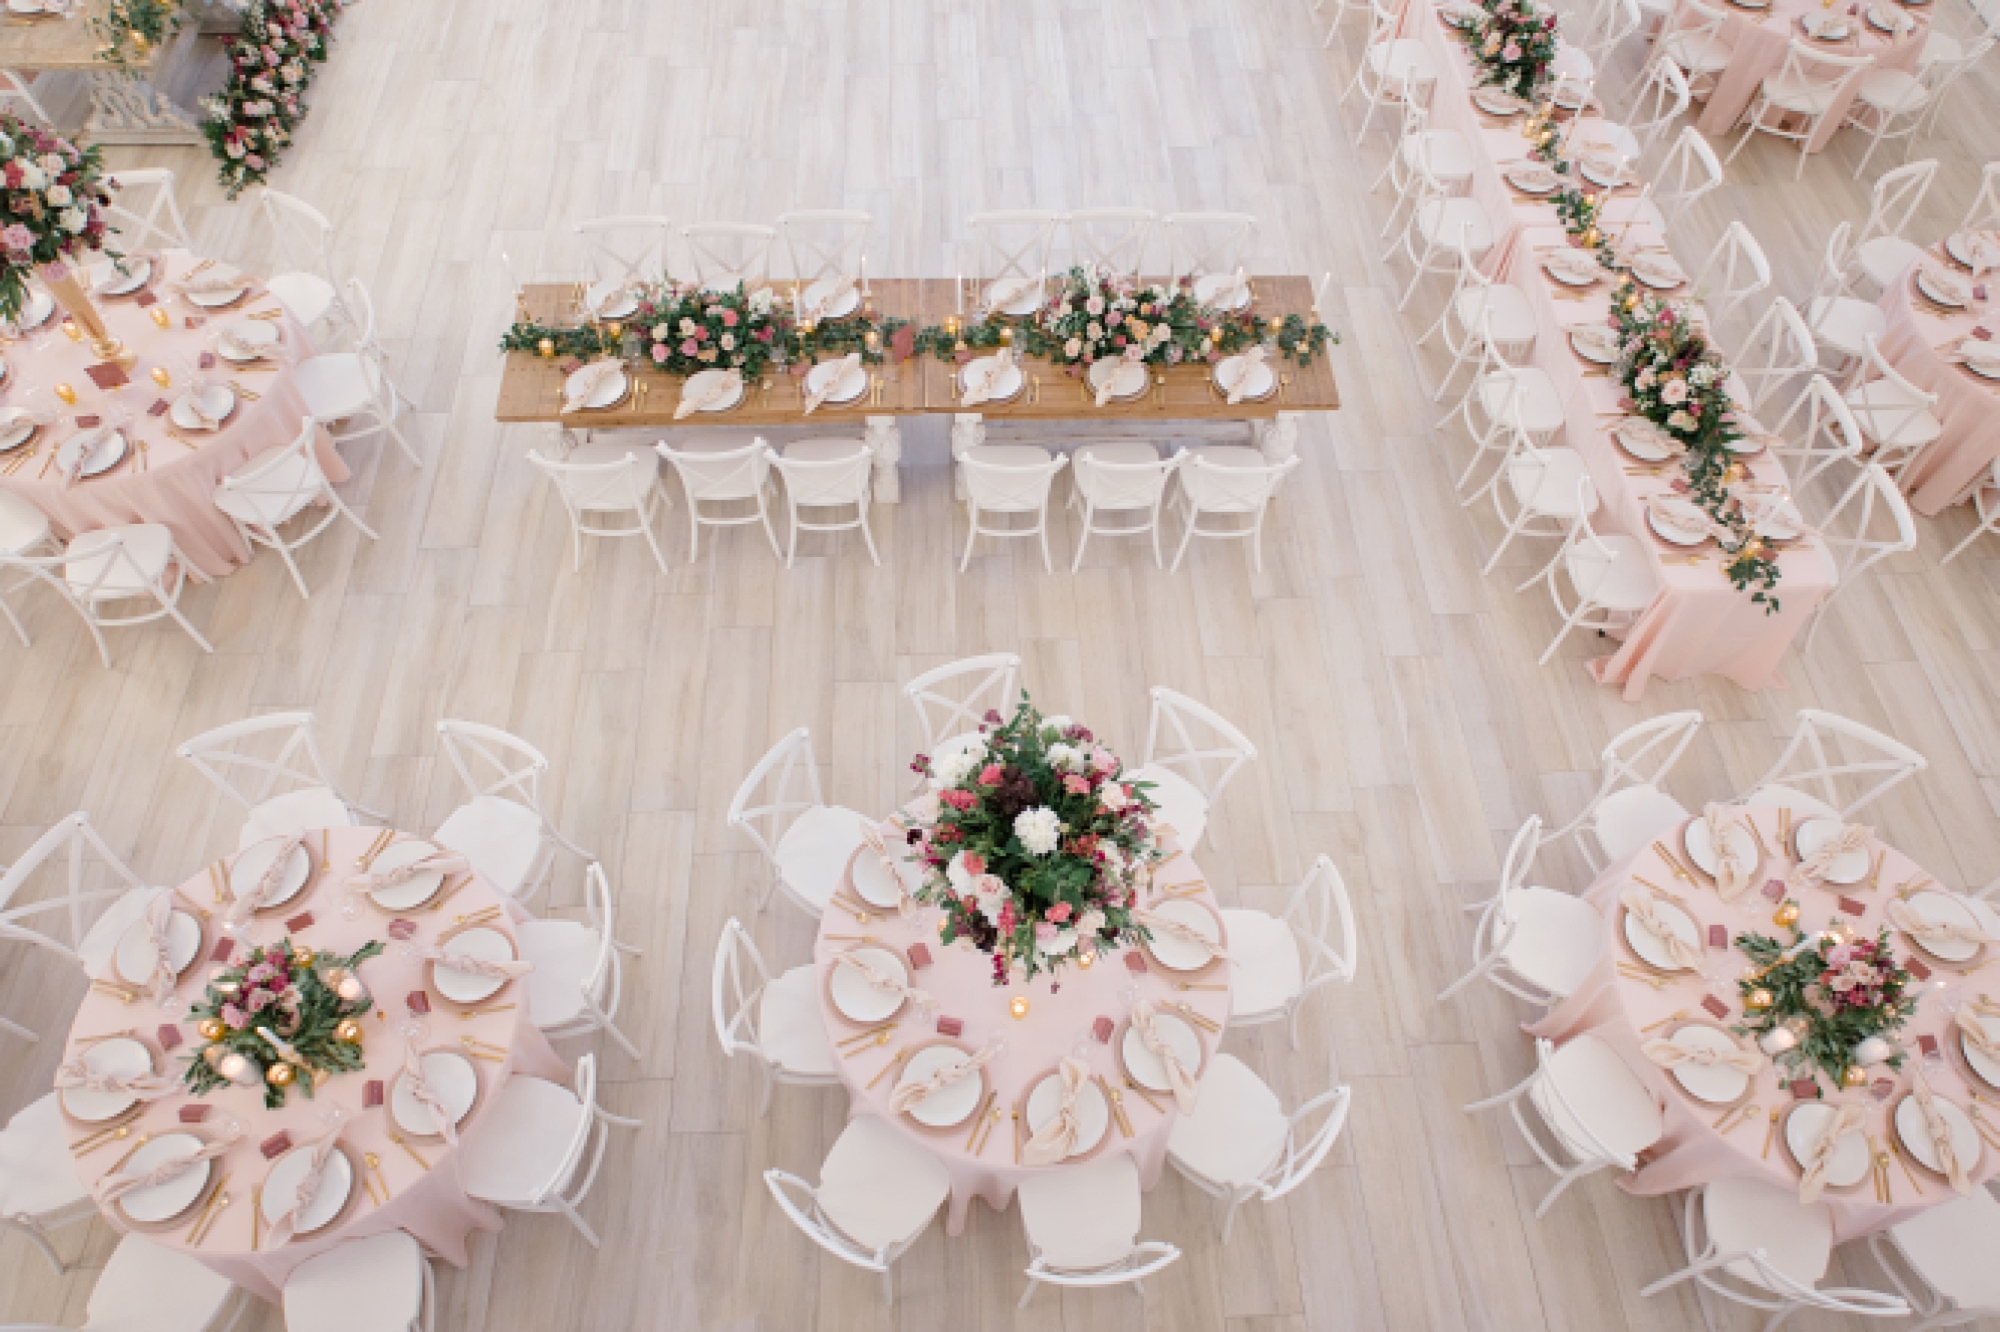 wedding reception with pink napkins and floral centerpieces from above 